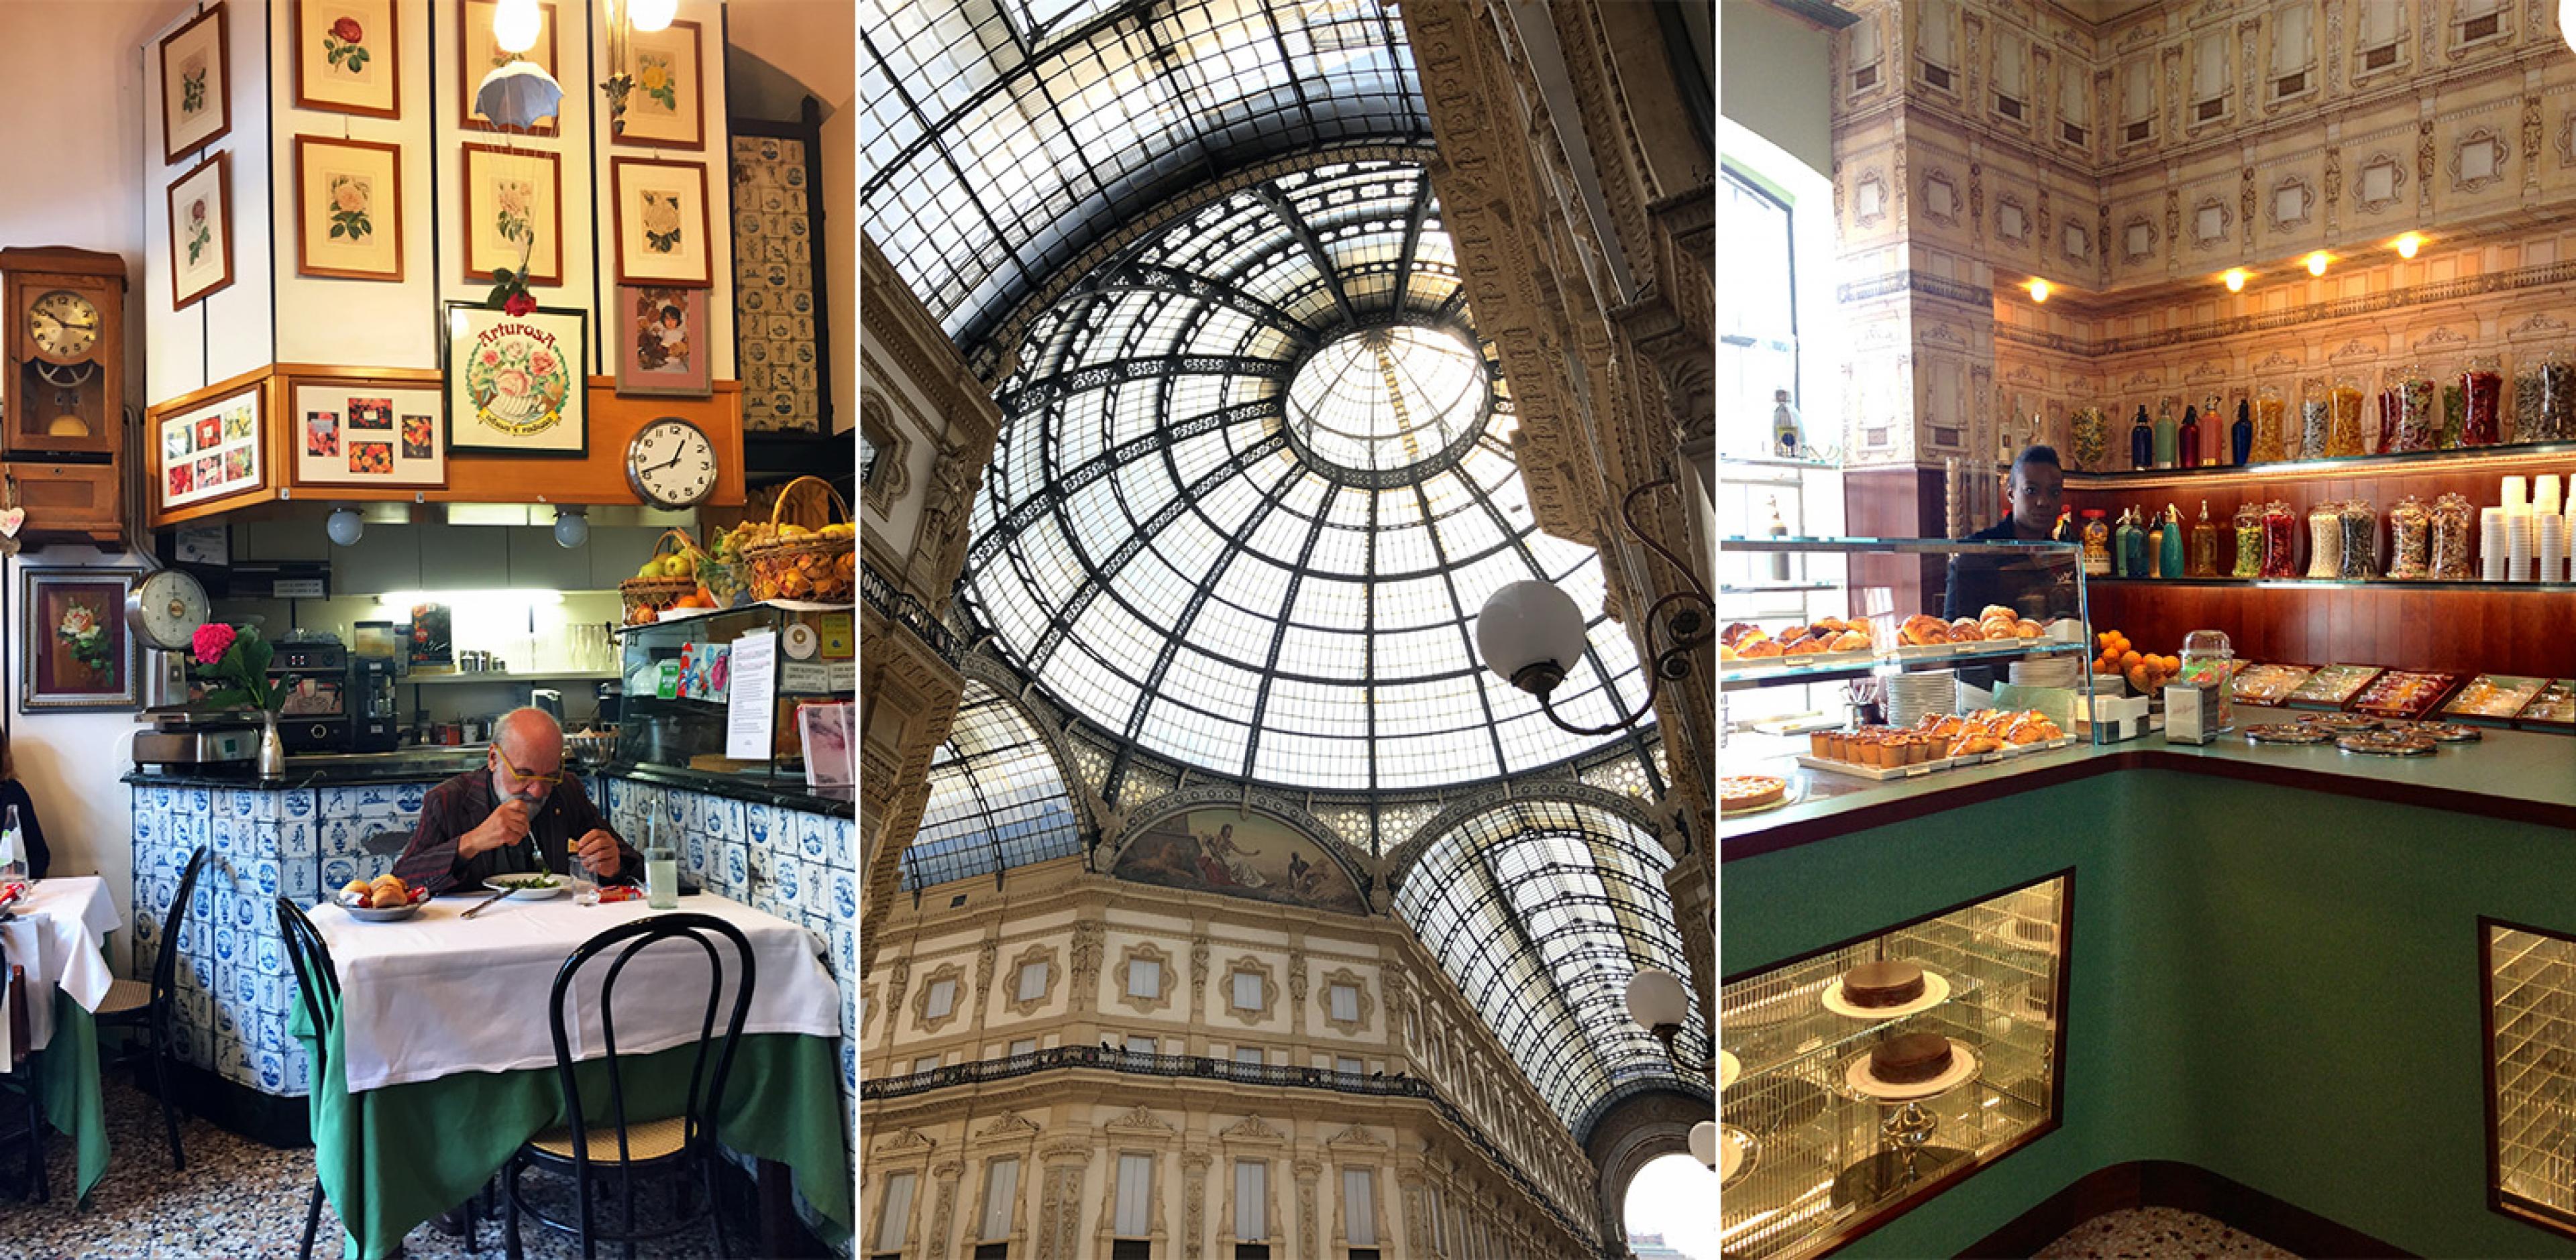 small cafe, Galleria Vittorio Emanuelle II and a cafe counter